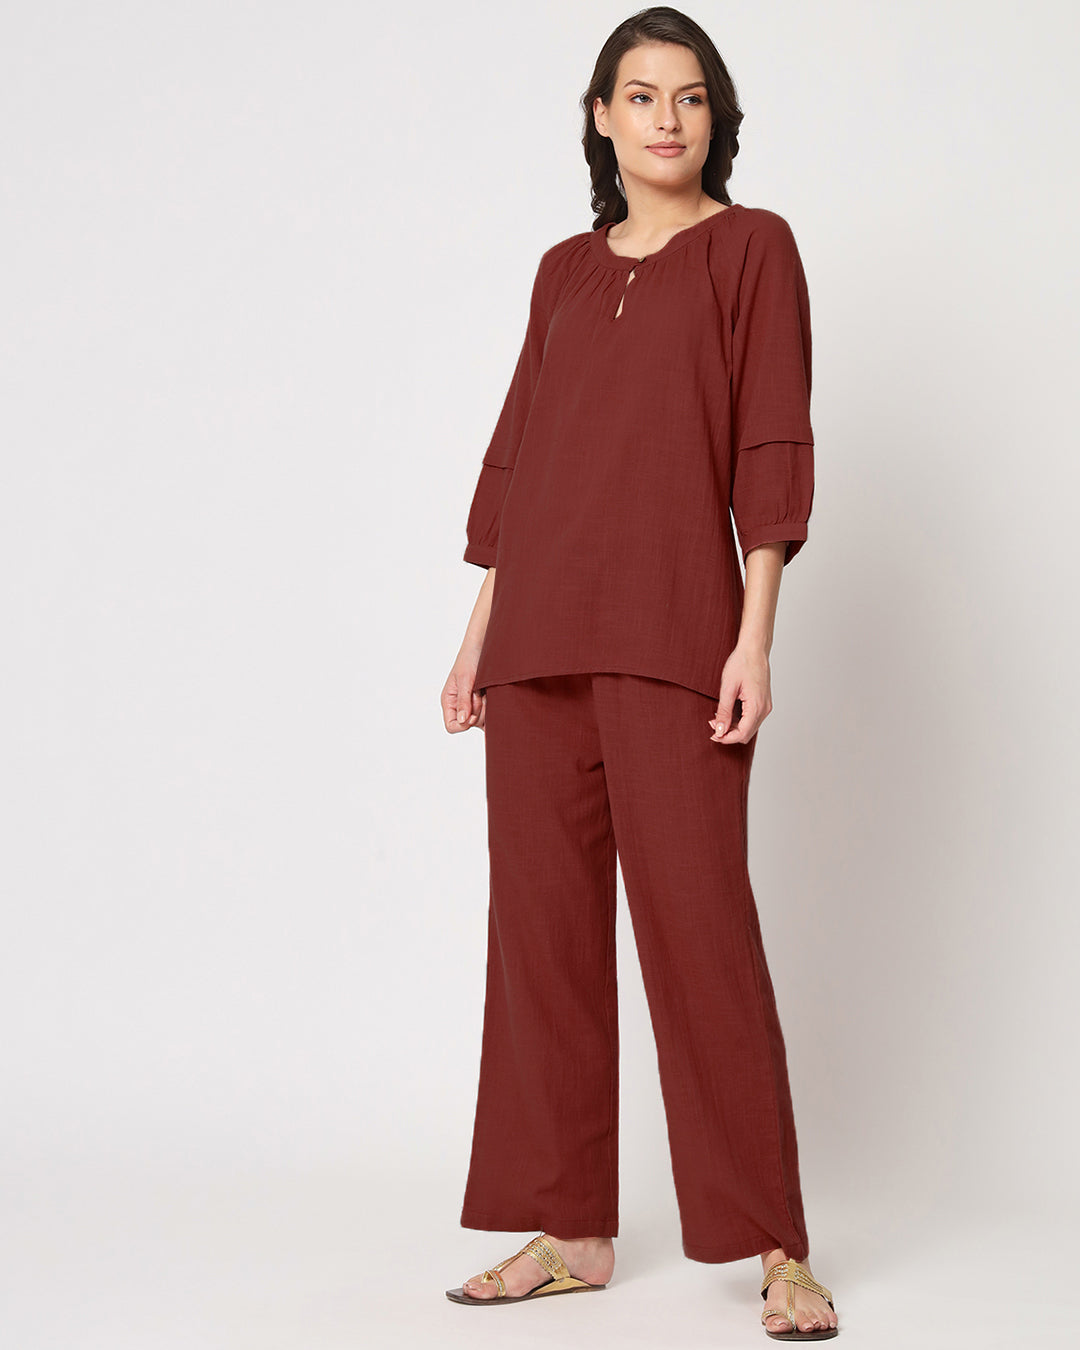 Russet Red Button Neck Solid Top (Without Bottoms)